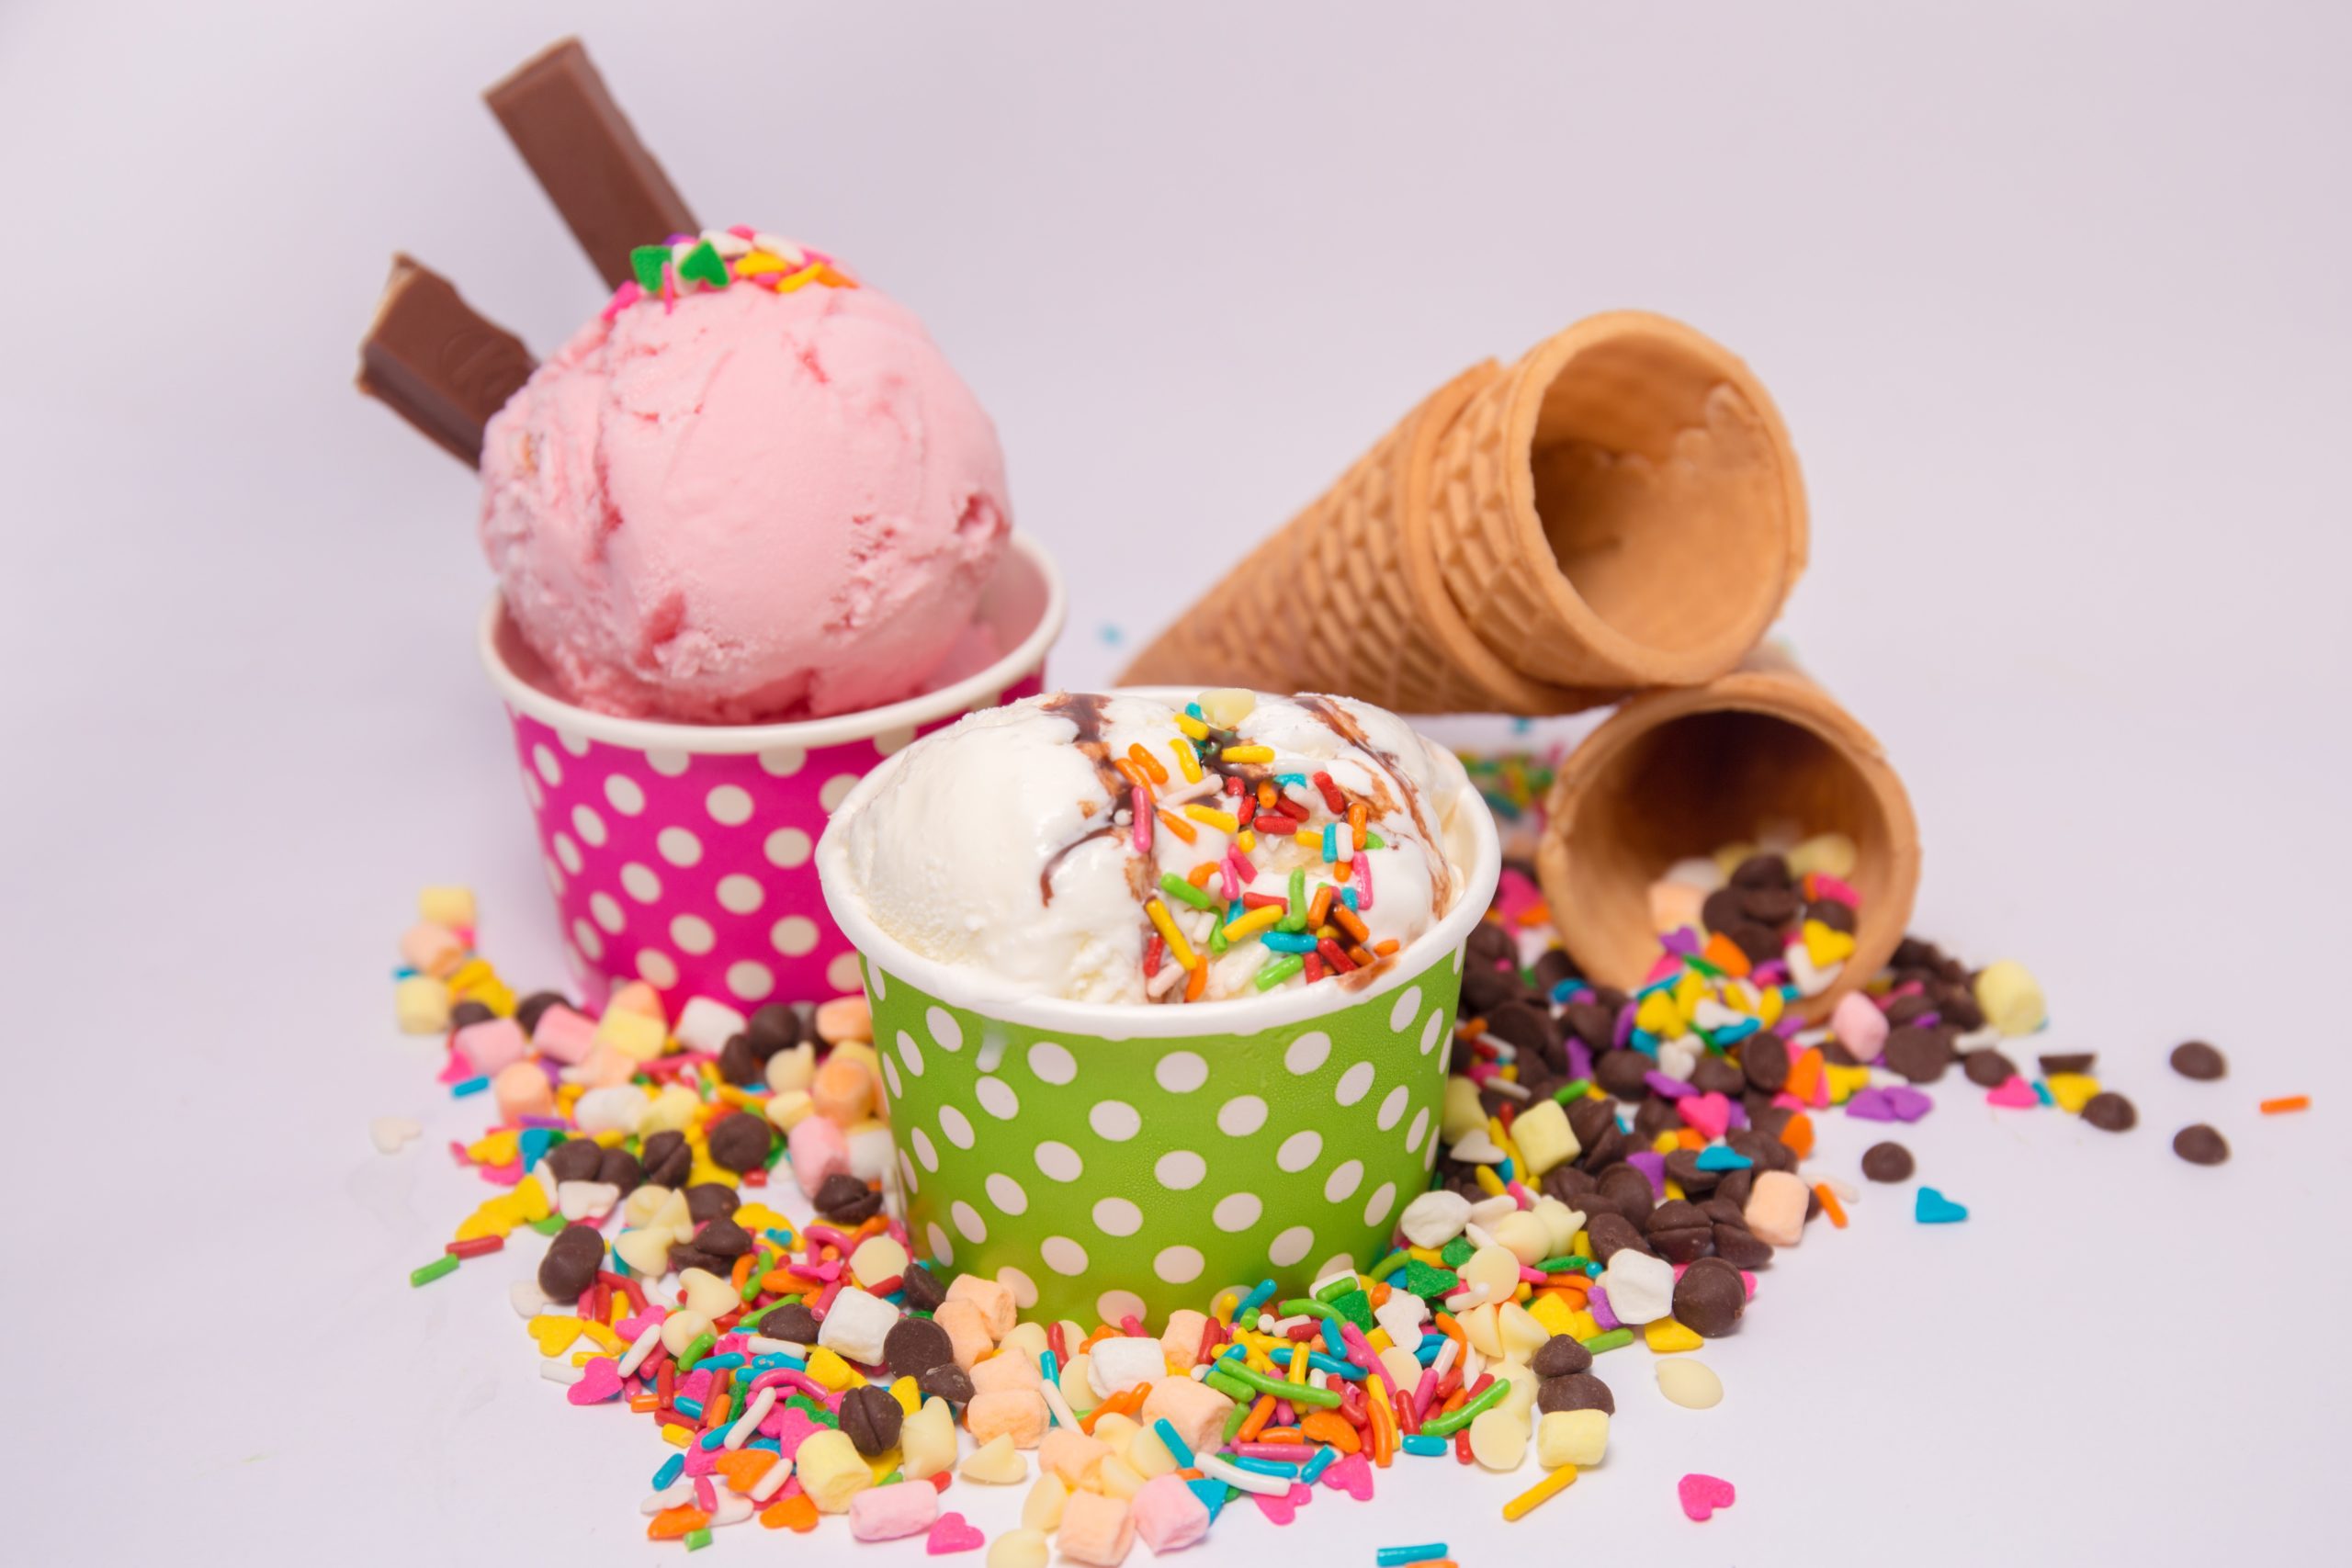 Strawberry and vanilla ice cream in cups with sprinkles and cones